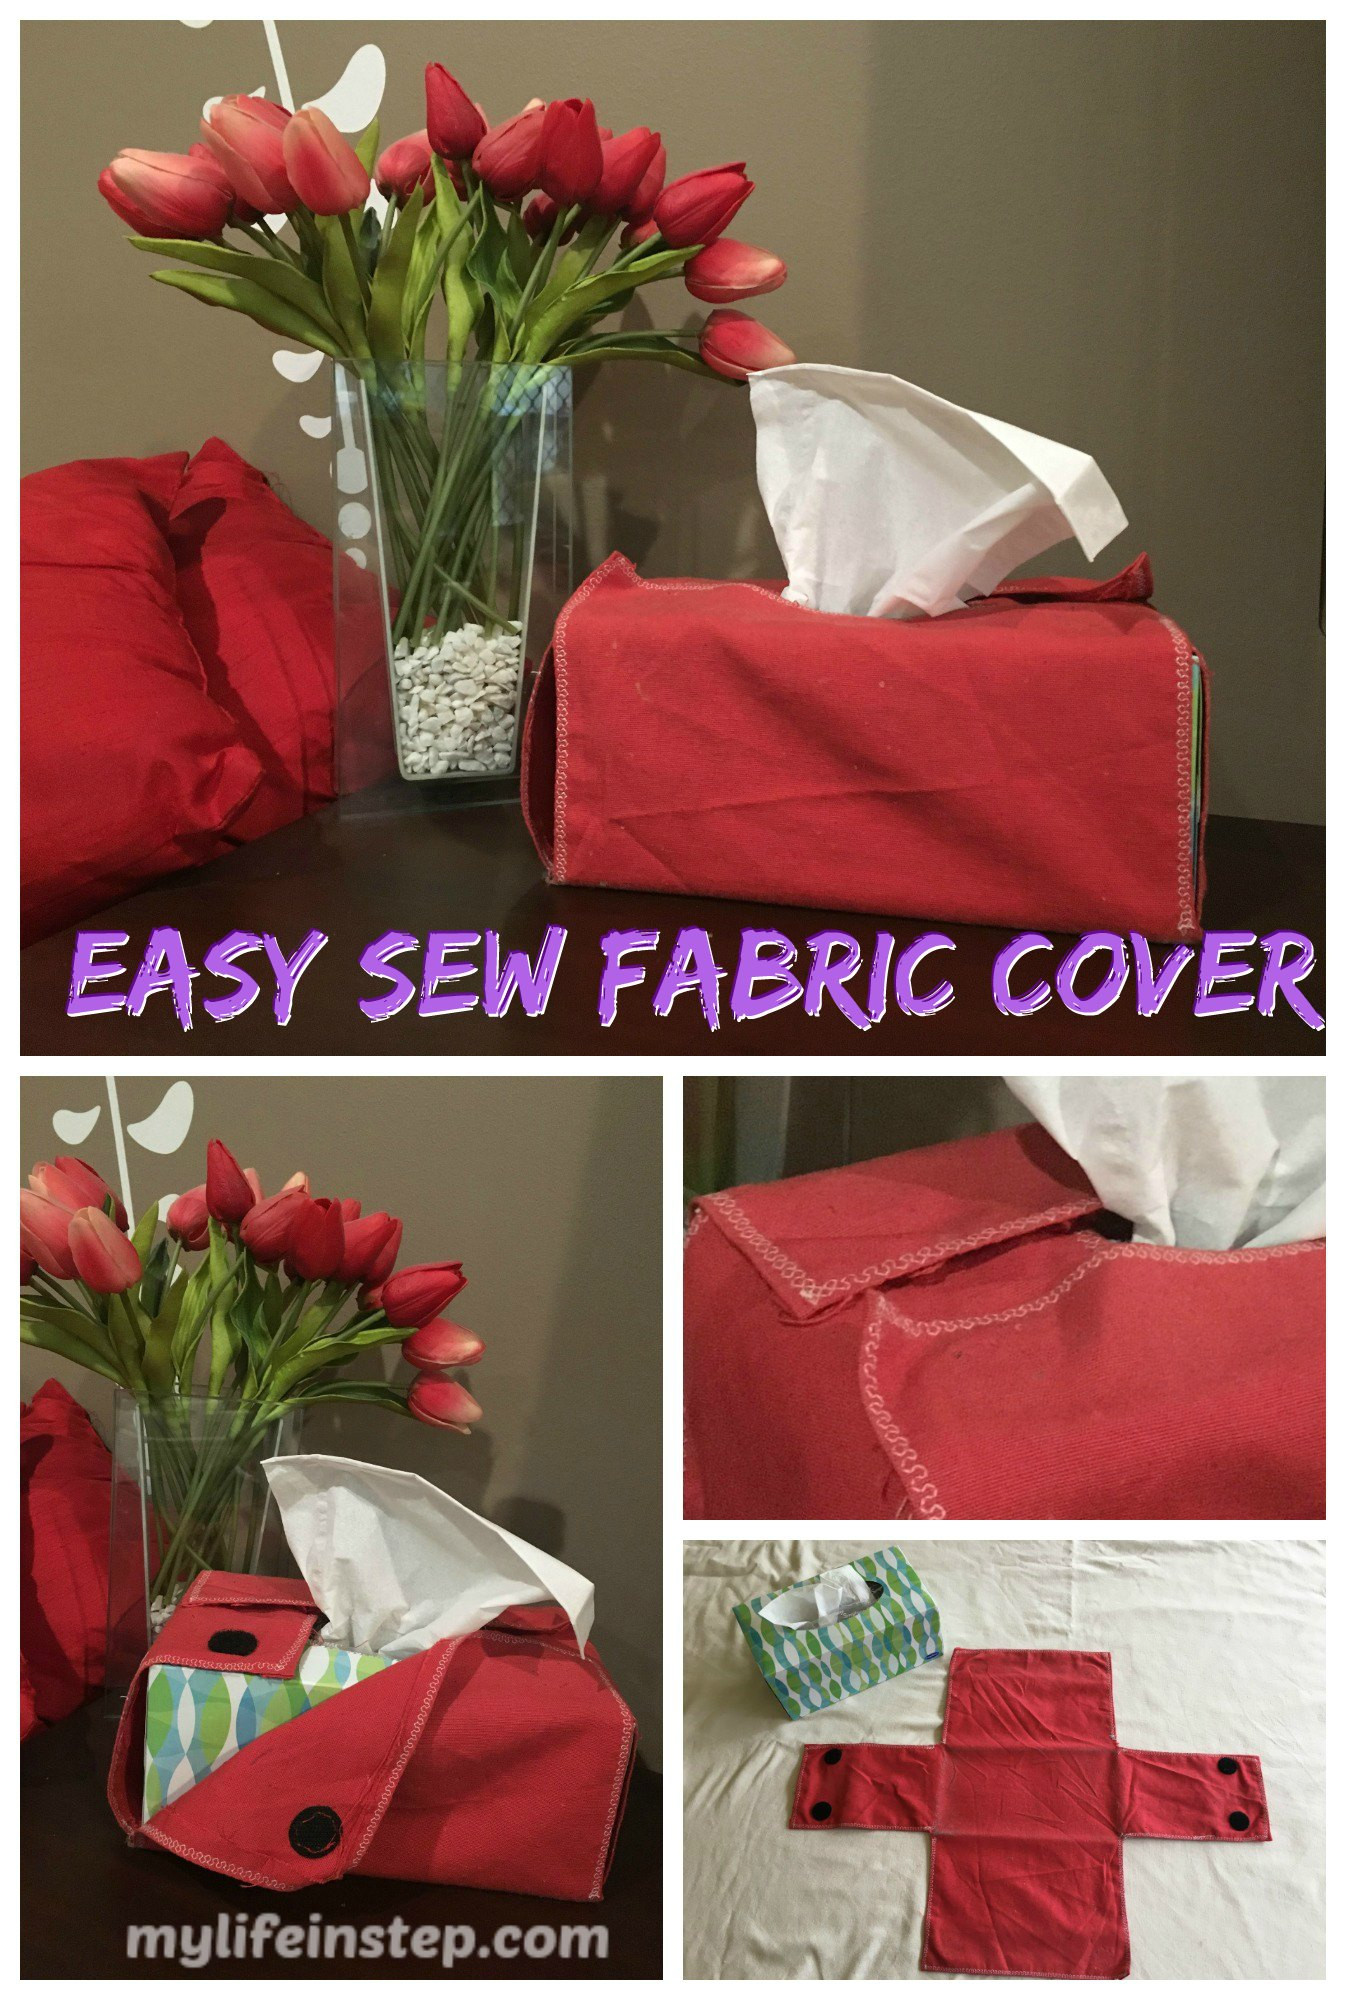 Tissue Box Cover DIY
 8 easy DIY Tissue Box Covers Jazz up the rooms in your